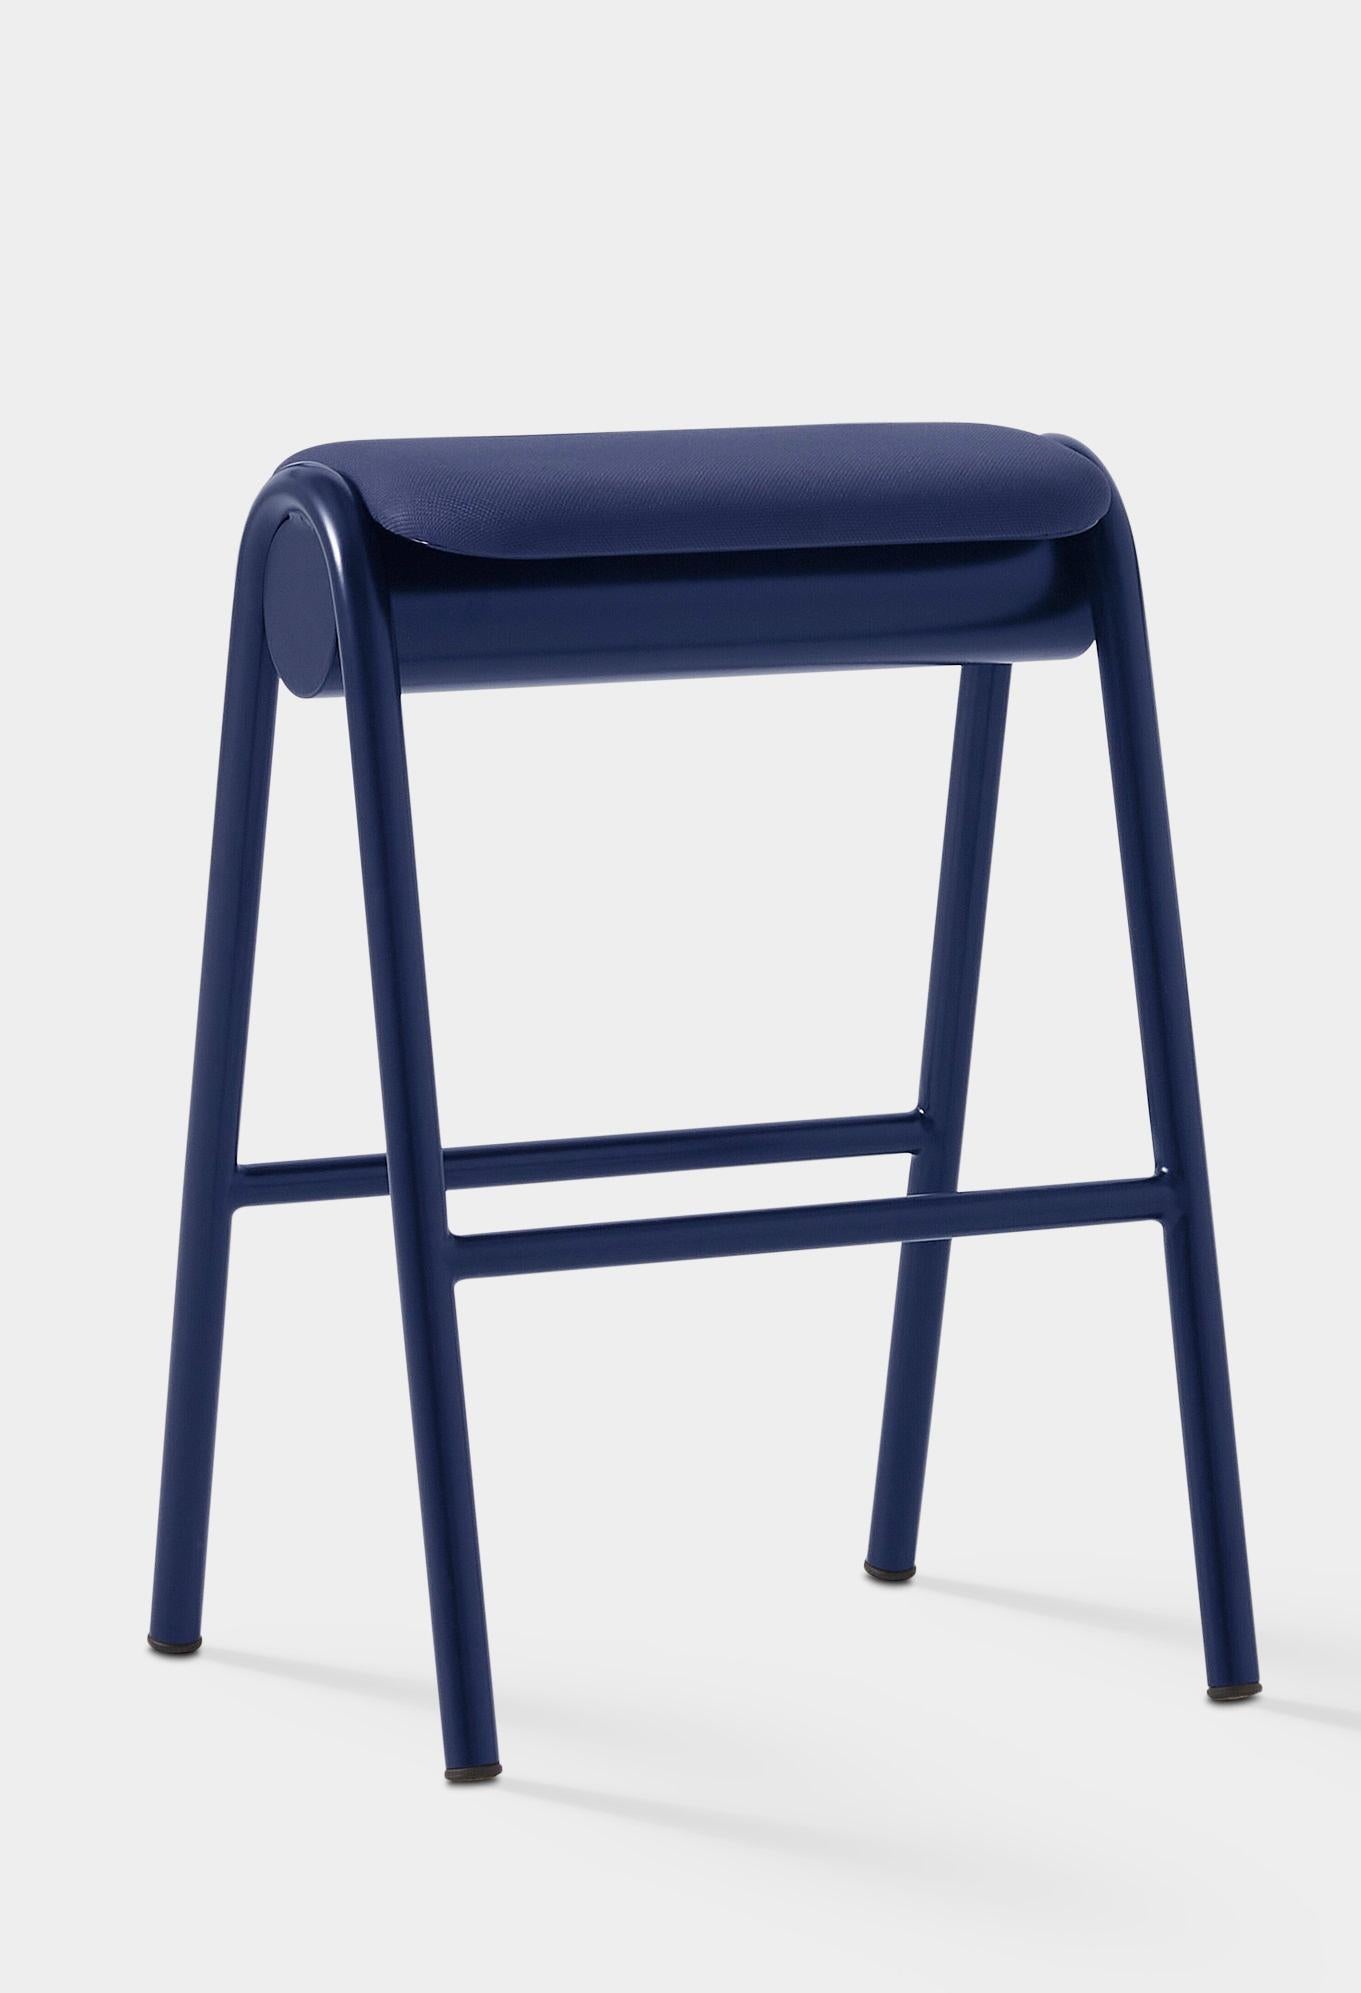 ZUM Low Bar Stool by Pepe Albargues
Designed By Carlos Jiménez. 
Dimensions: D 45 x W 49 x D 69 cm.
Materials: Aluminum, foam, plywood and upholstery.

Curved plywood seat. Aluminum structure lacquered any RAL color. Foam CMHR (high resilience and